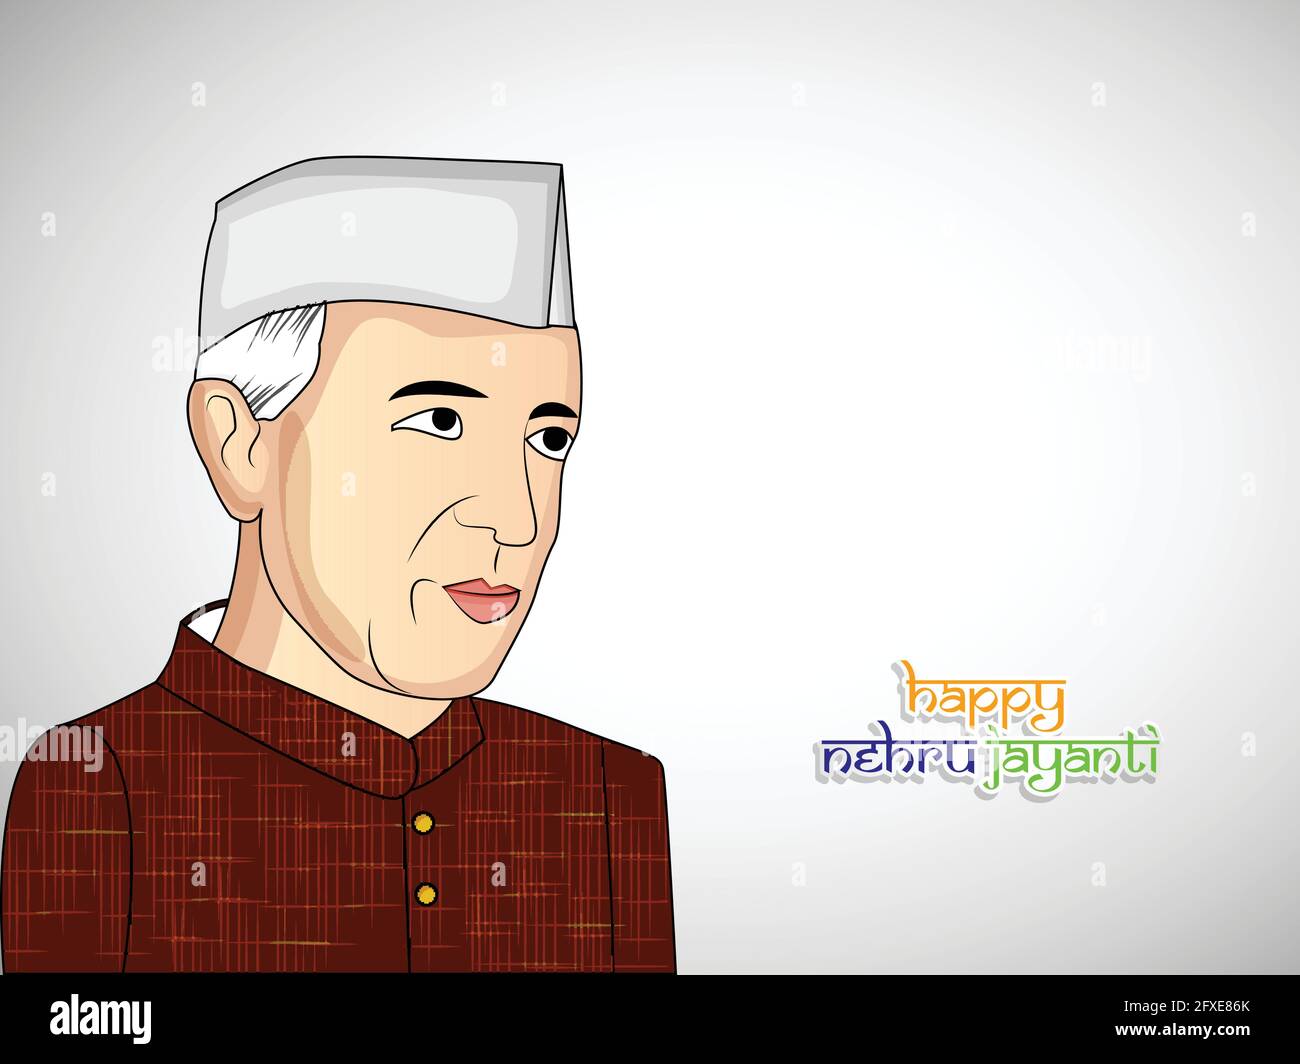 Rajesh Reviews: Day .17-JAWAHARLAL NEHRU - The Discovery of India  (Continued)